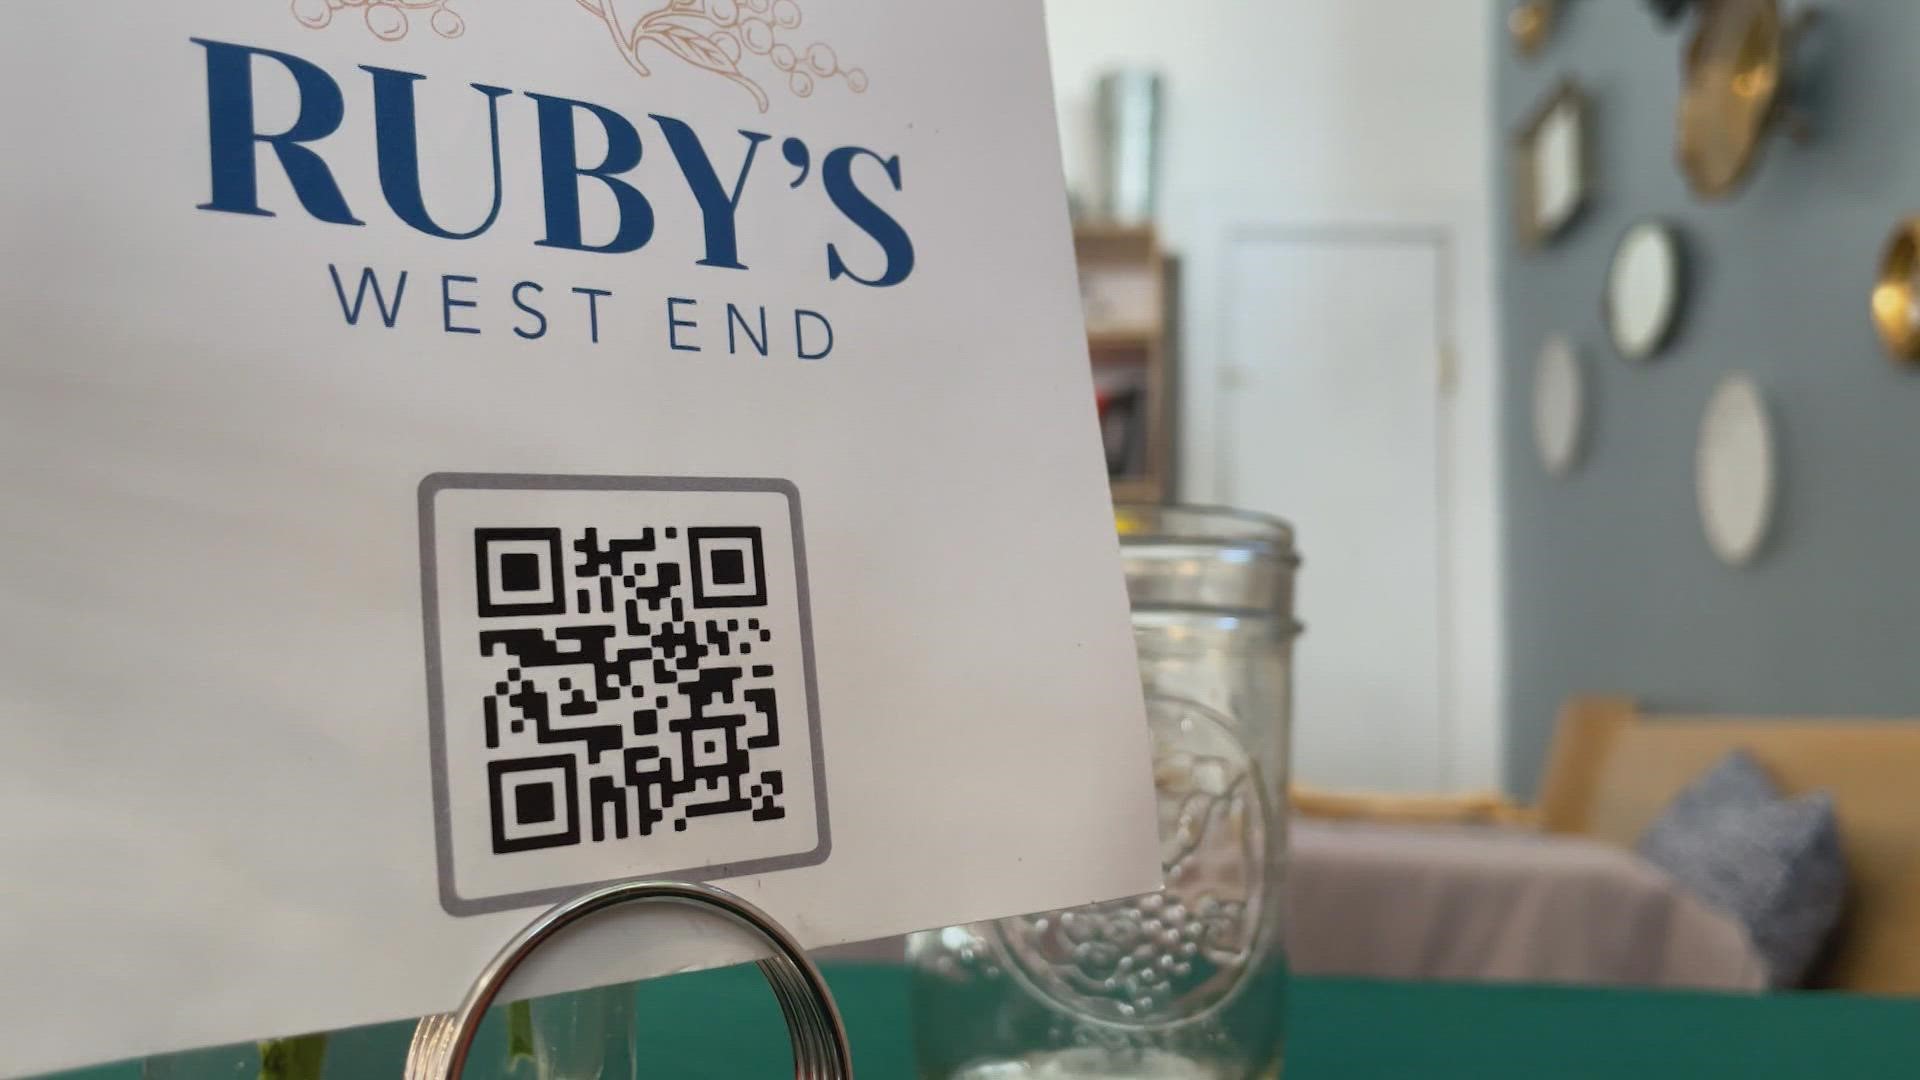 Ruby's West End owner Corrinna Stum has decided to forego some mainstays of the restaurant industry like paper menus and dry-cleaning to raise pay for her employees.